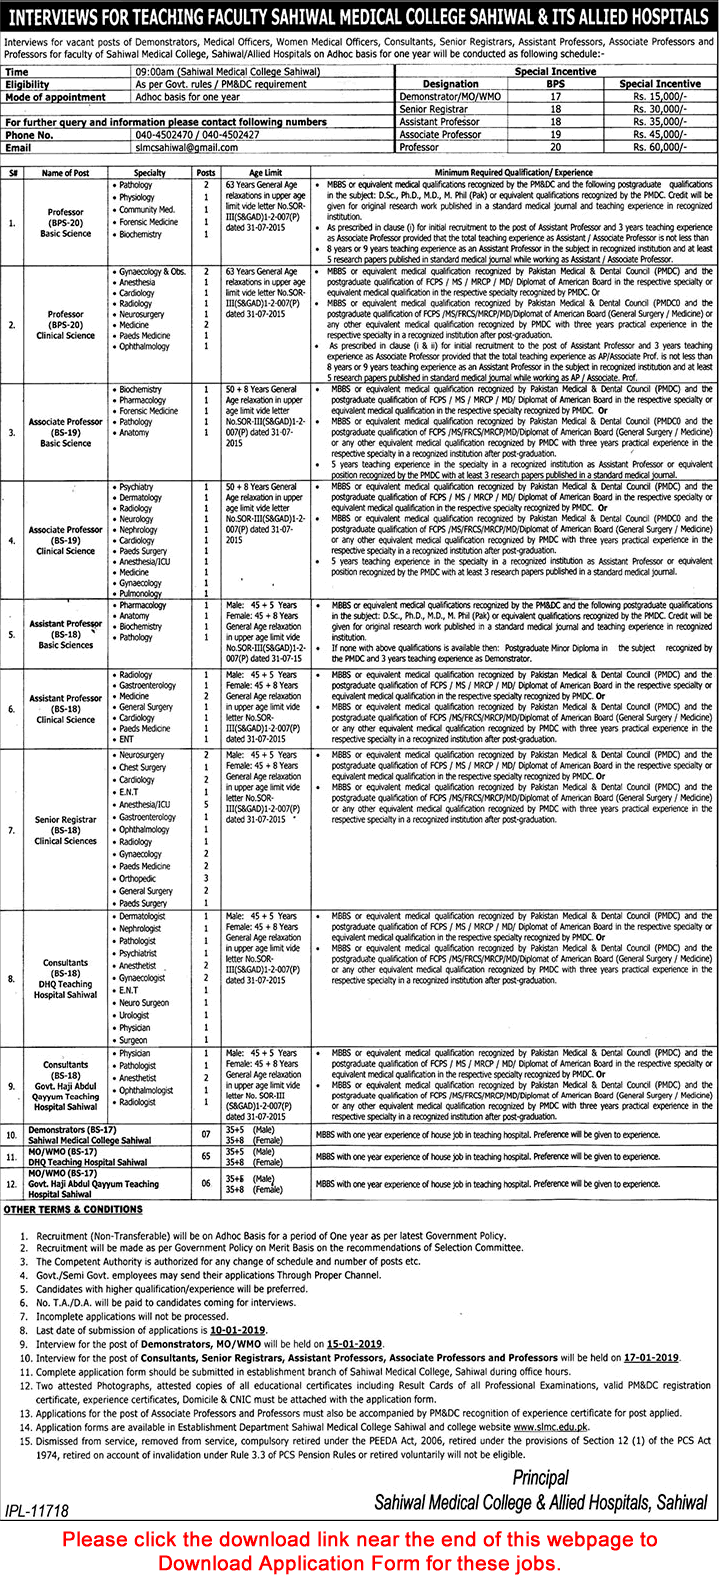 Sahiwal Medical College & Allied Hospitals Jobs December 2018 Application Form Teaching Faculty & Others Latest